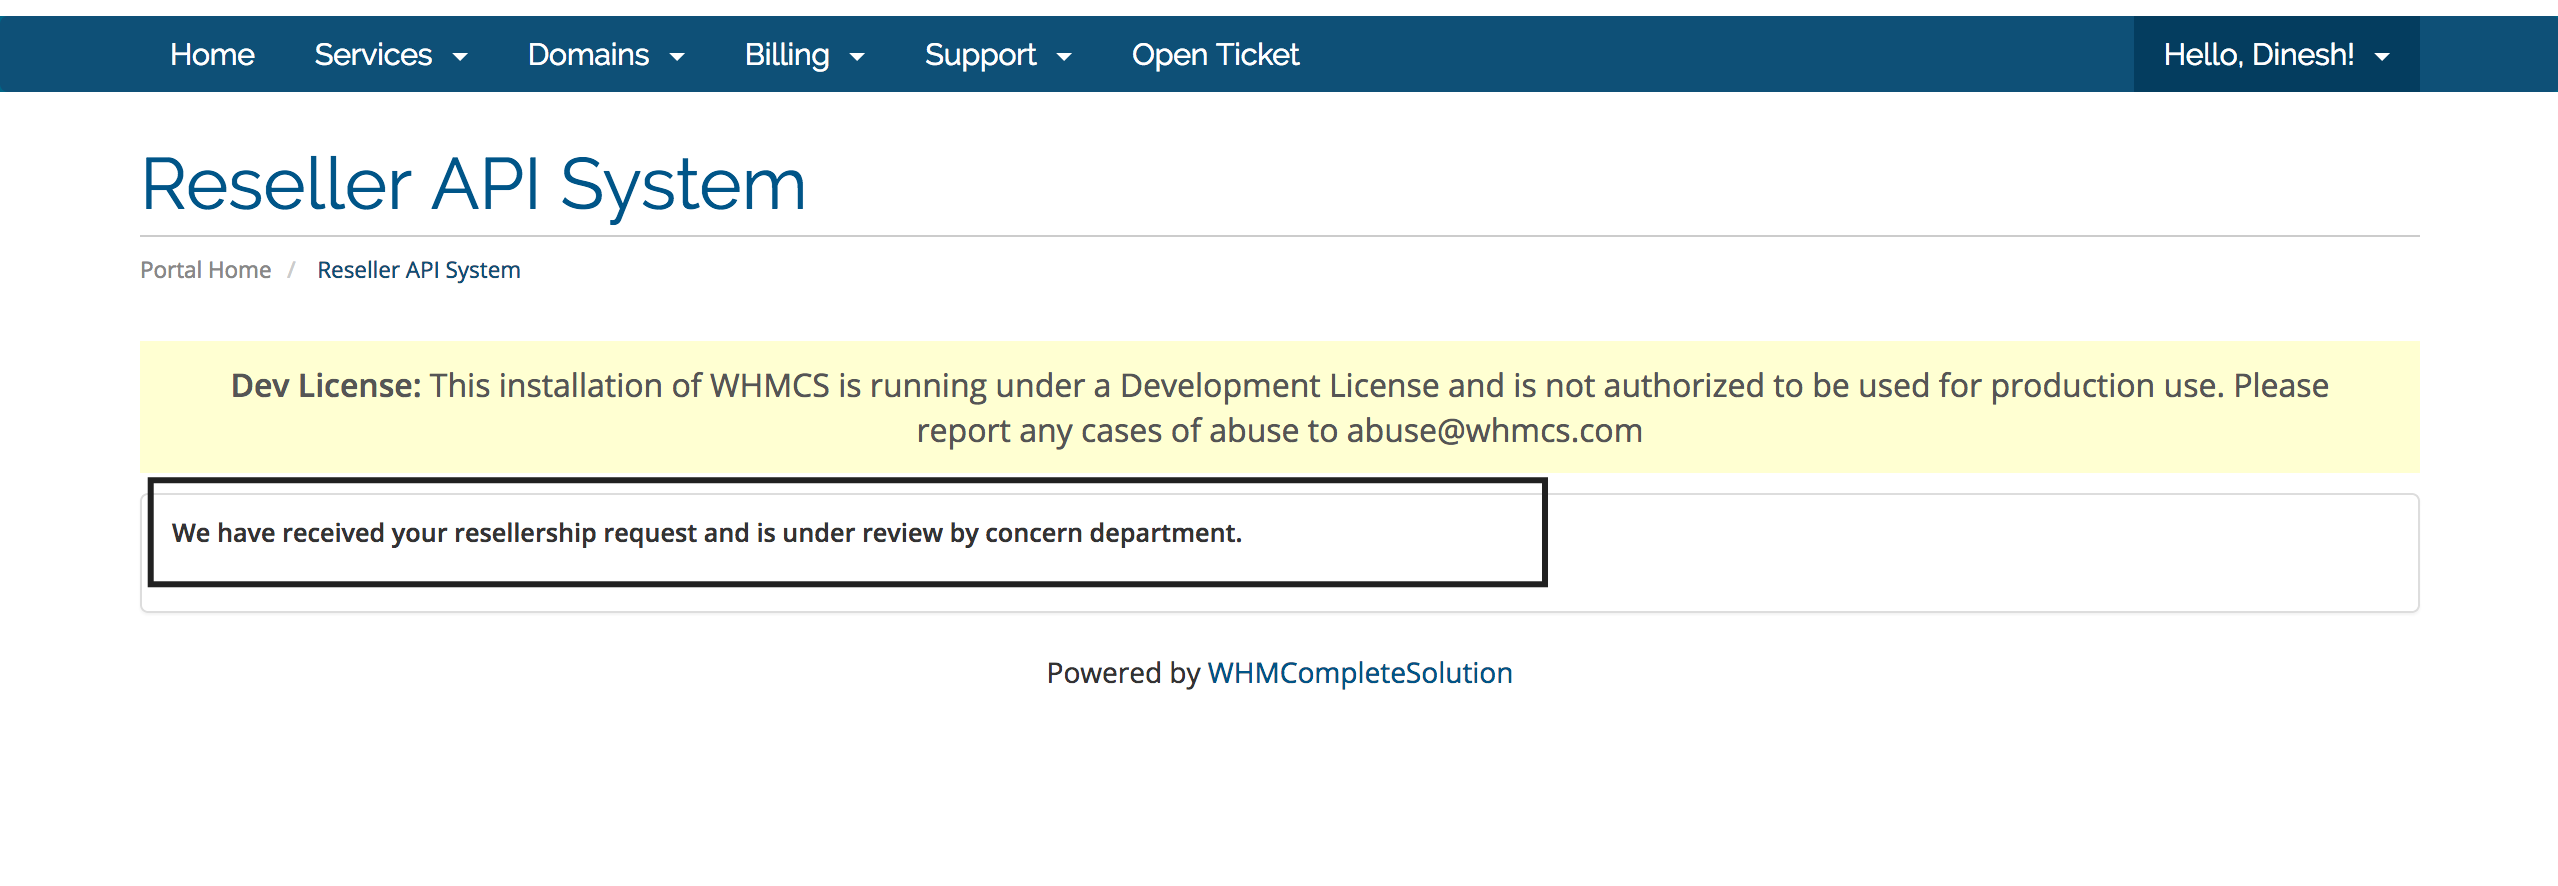 Reseller API System Module for WHMCS